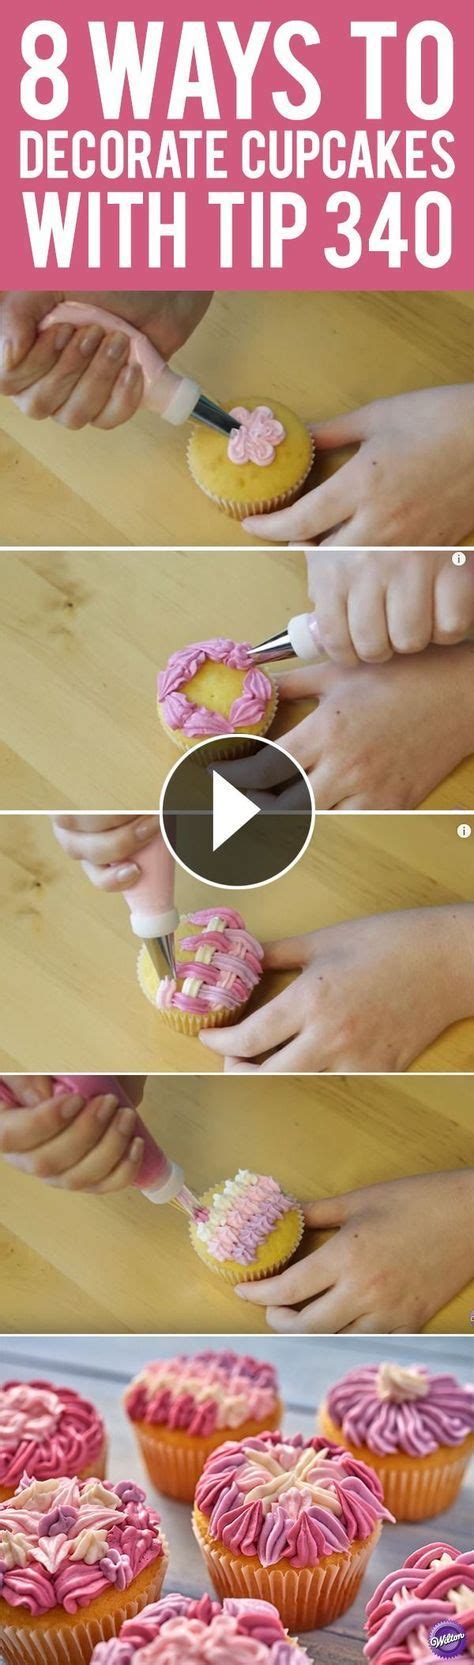 Learn Eight Ways To Decorate Cupcakes Using The Wilton Decorating Tip